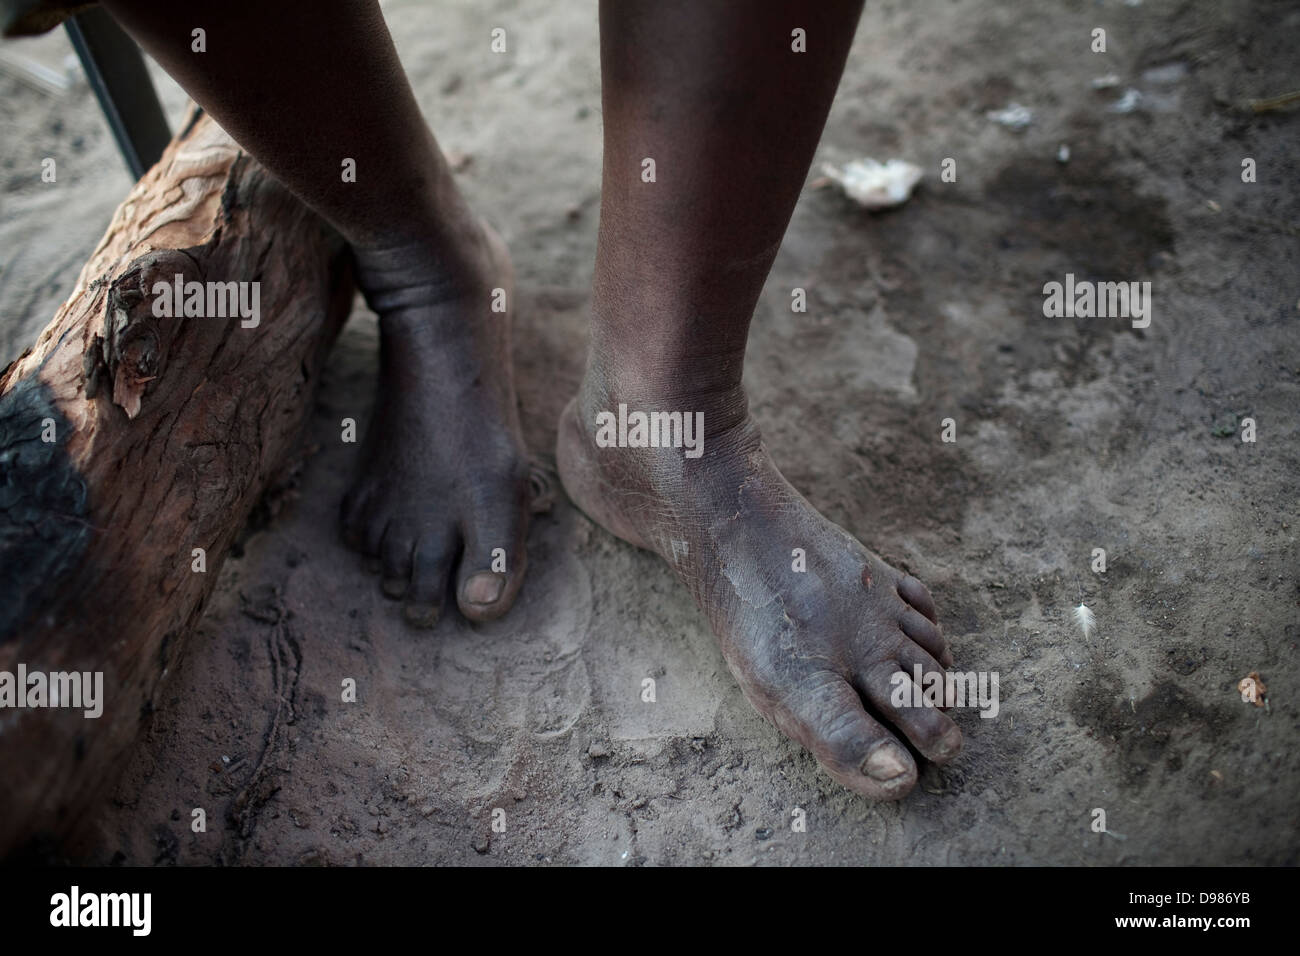 Fifty-seven-year-old Esther Khoza's feet Esther lives in mud shack without electricity running water or toilet in shadow Stock Photo